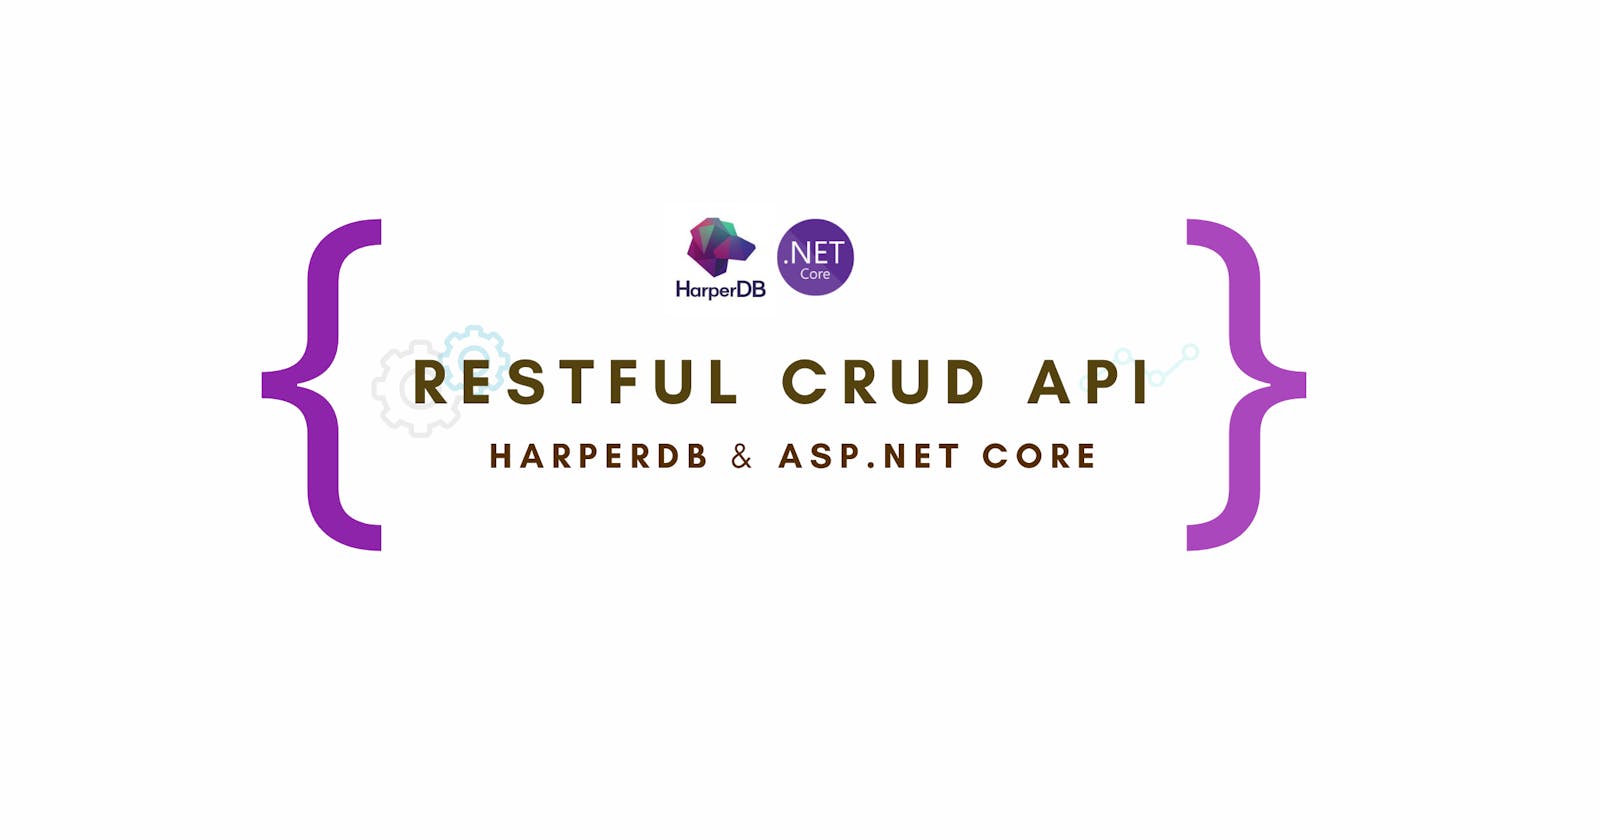 Building Restful CRUD APIs with HarperDB and .Net Core